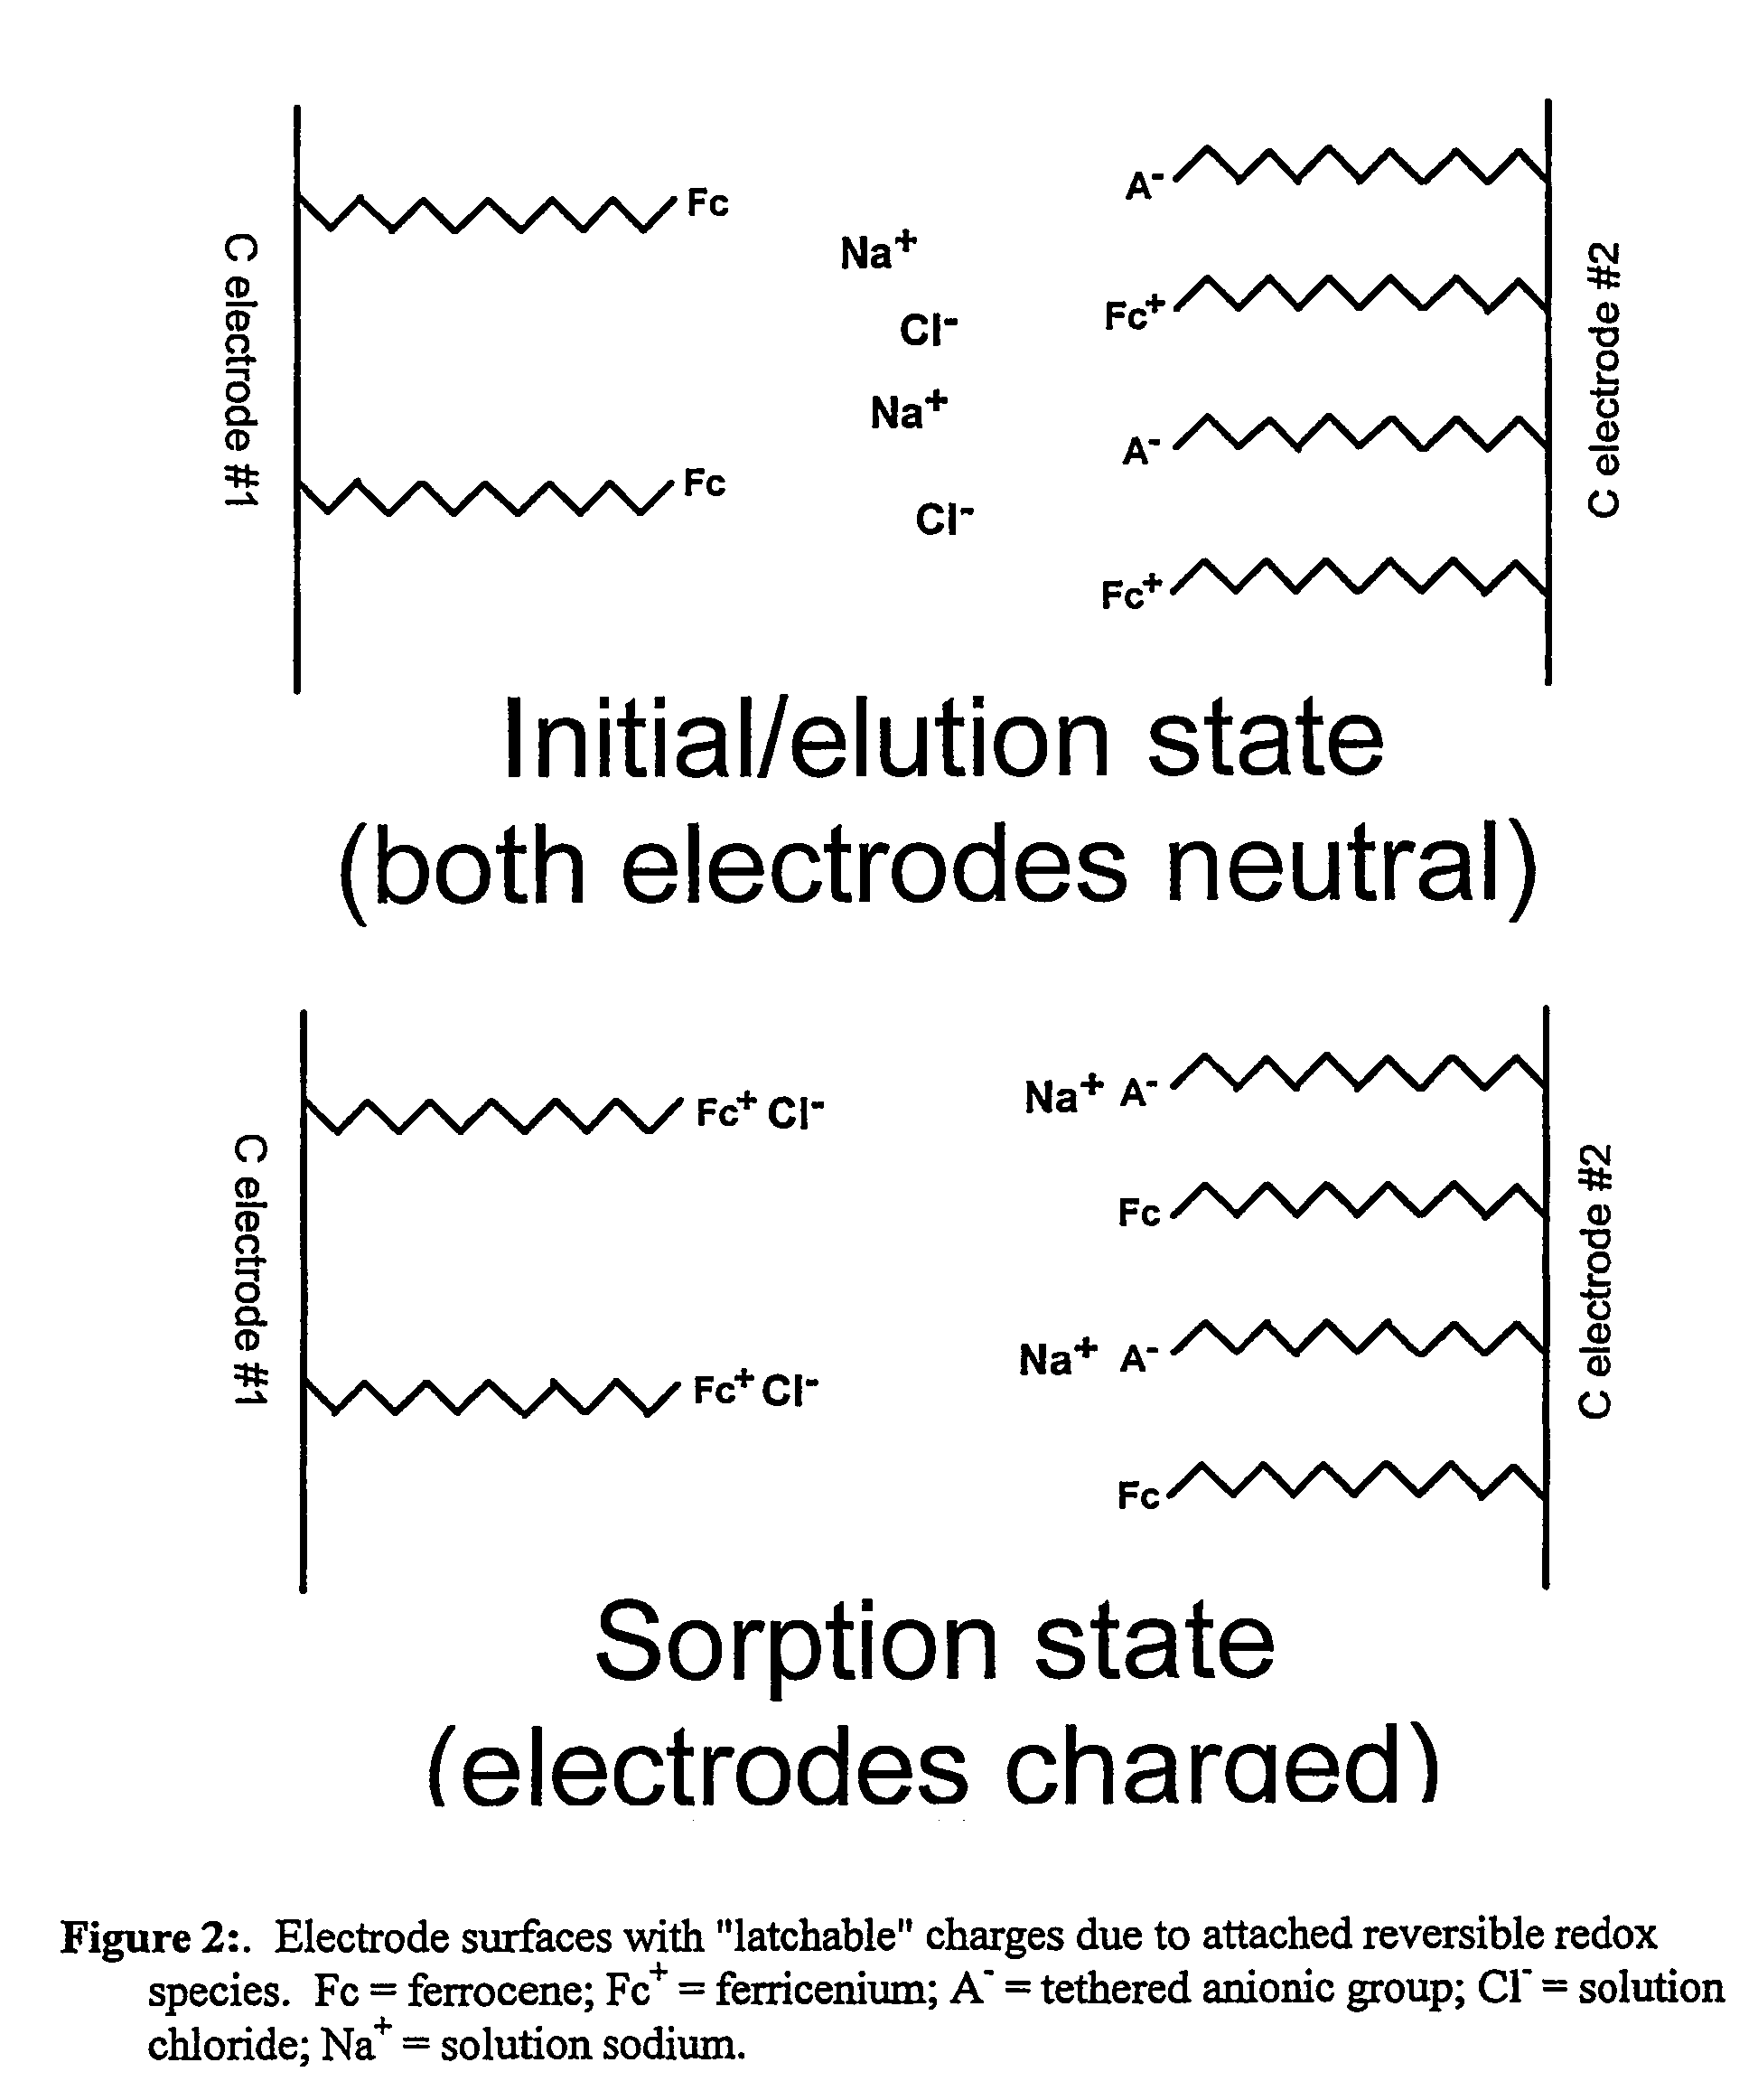 Redox-switchable materials